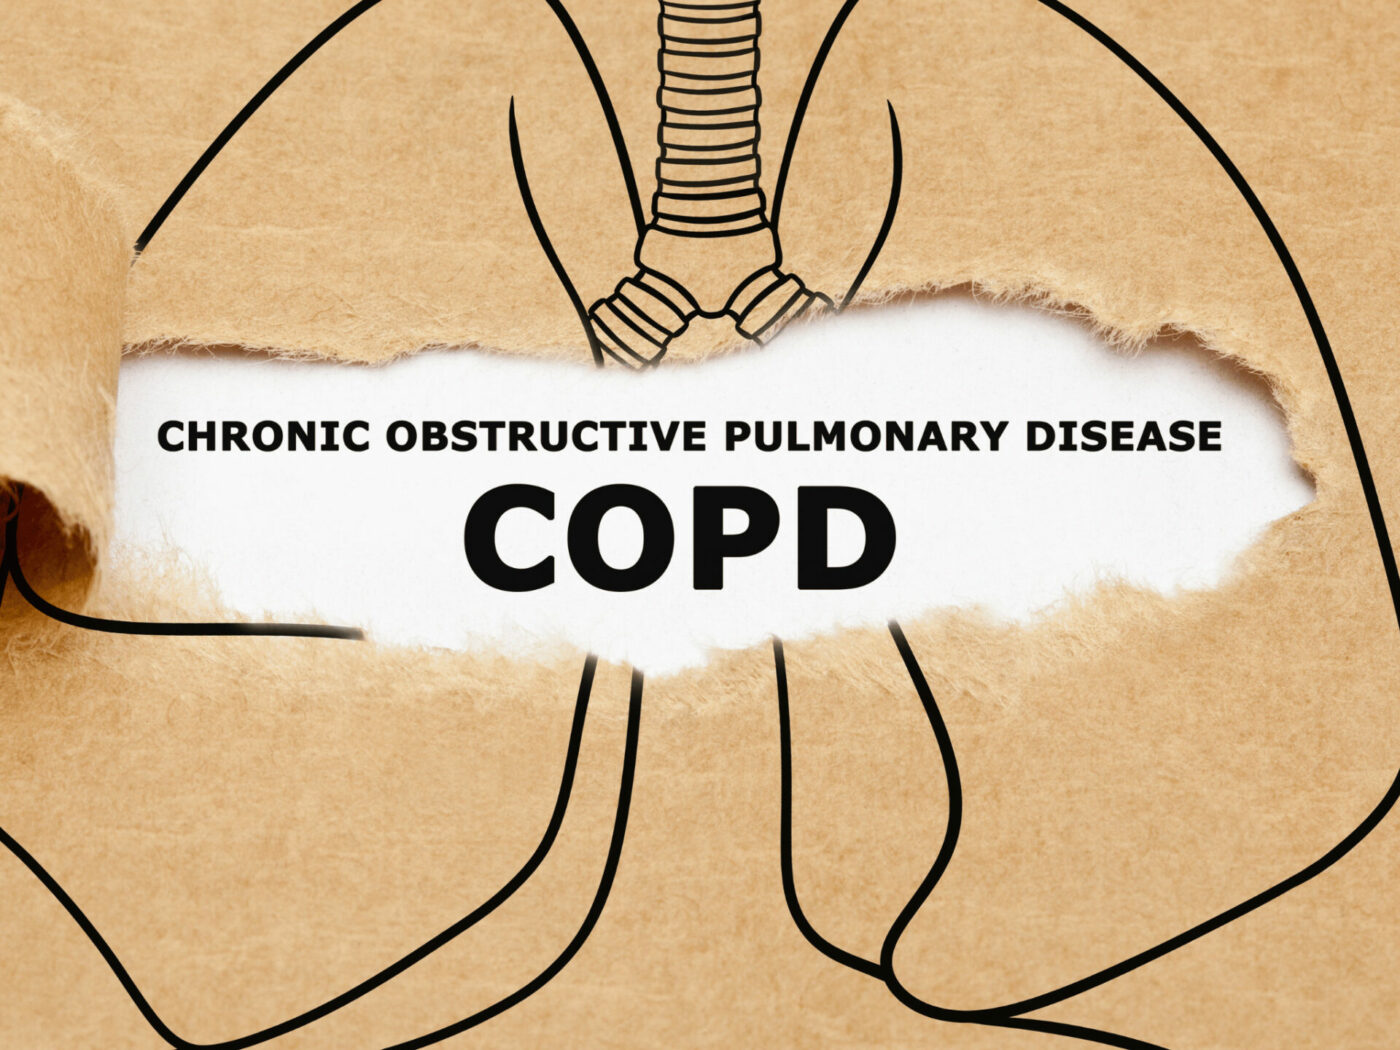 Torn up drawing on cardboard of a lung with the inscription Chronic obstructive pulmonary disease COPD